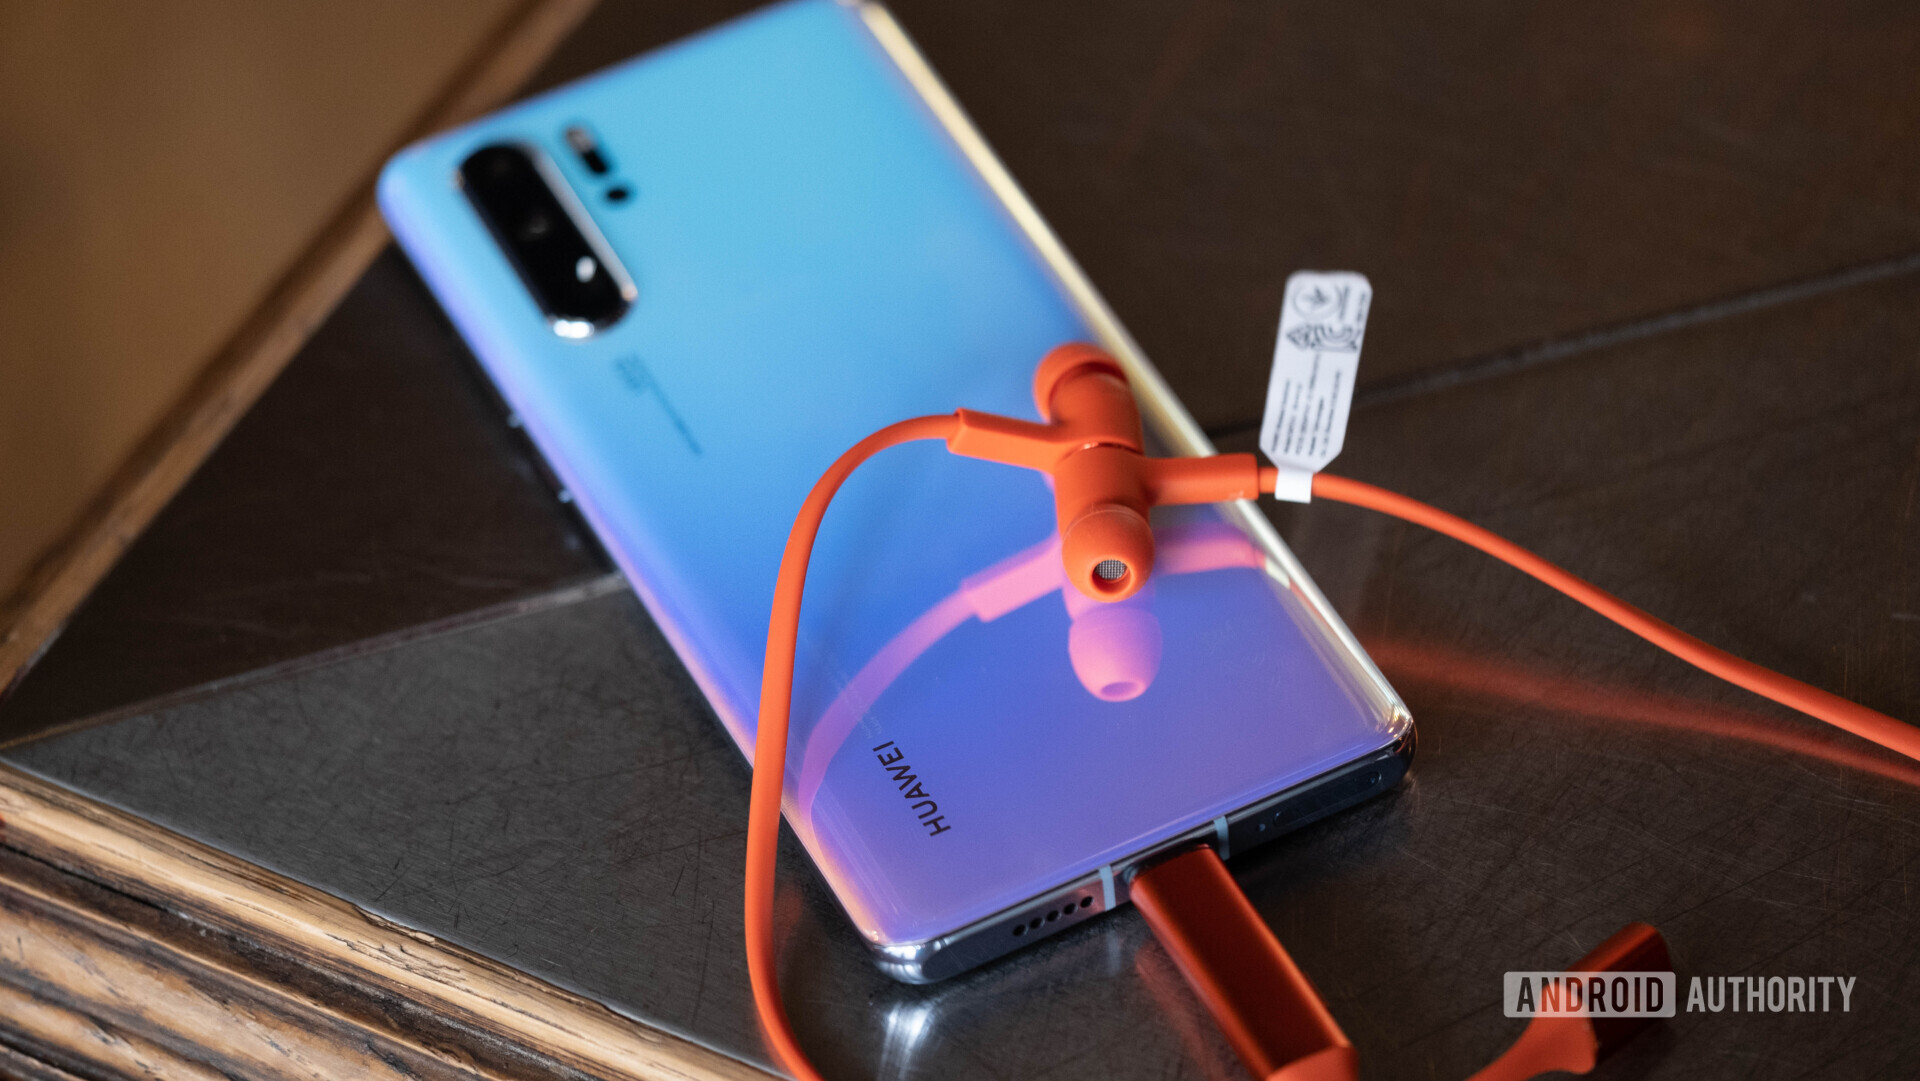 HUAWEI Freelace earbuds resting on HUAWEI P30 Pro, connected to the phone.